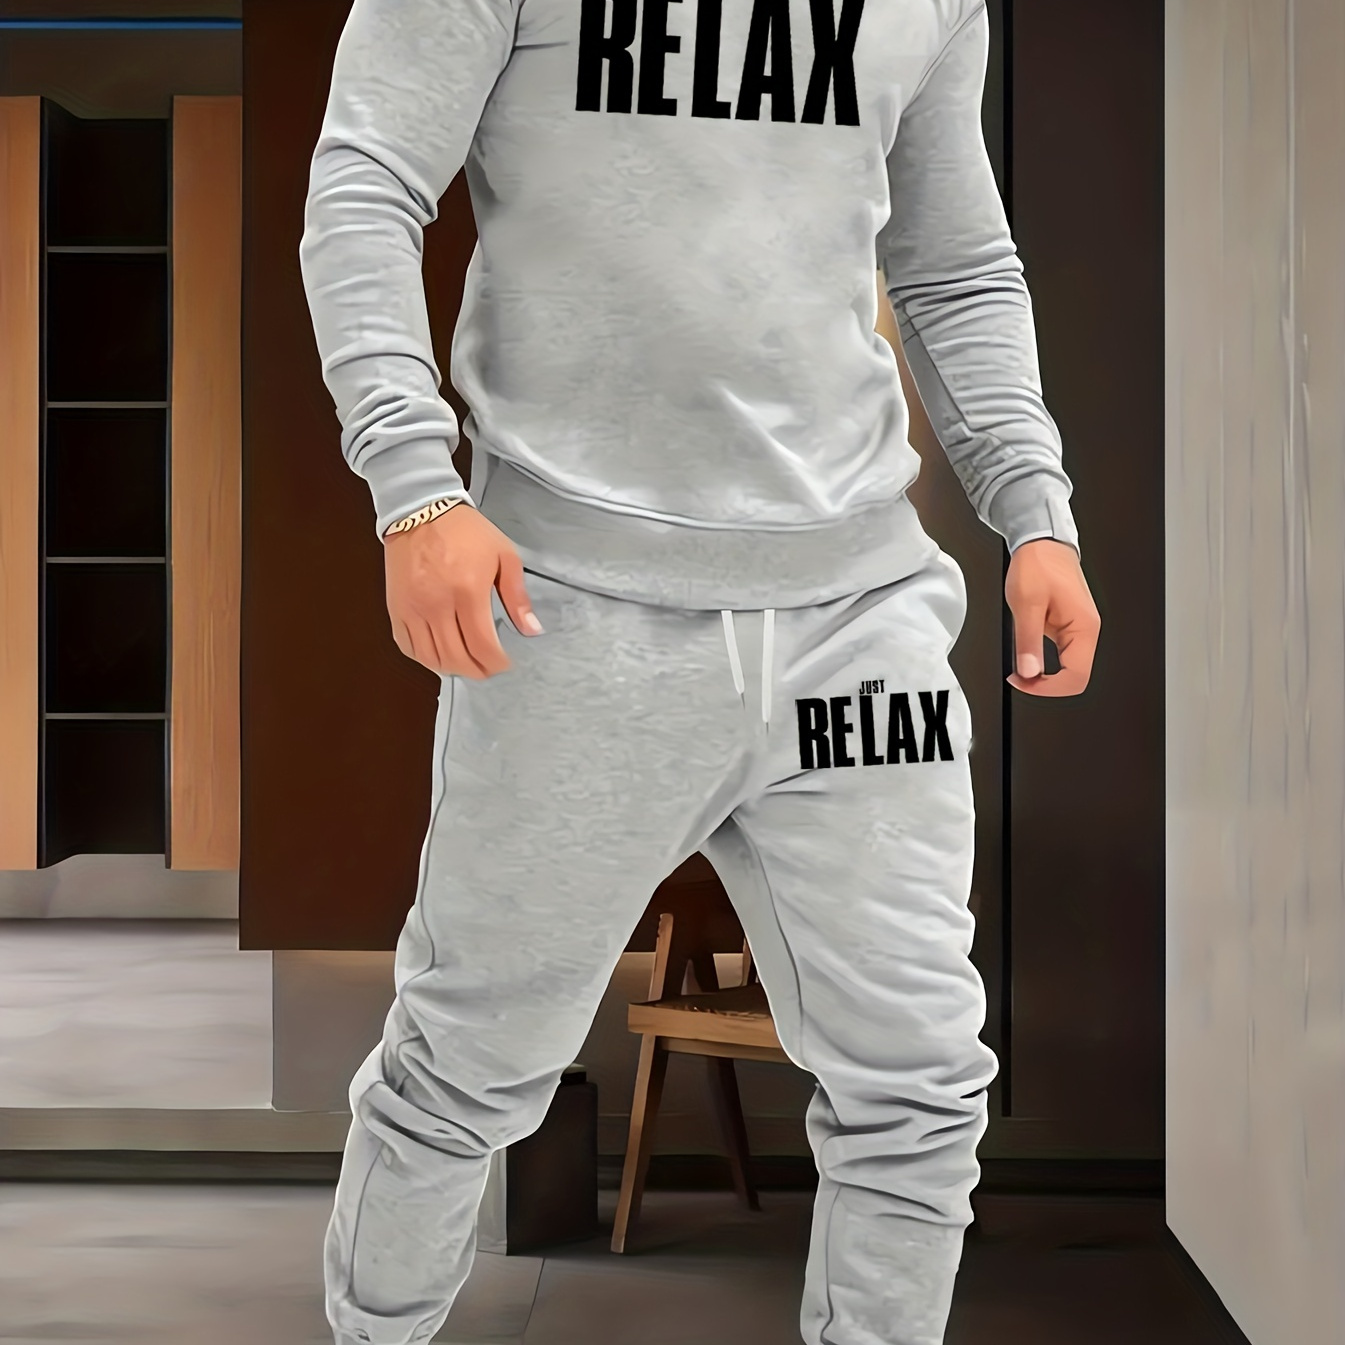 

Relax Print, Men's 2pcs Outfits, Casual Crew Neck Long Sleeve Pullover Sweatshirt And Drawstring Sweatpants Joggers Set For Spring Fall, Men's Clothing